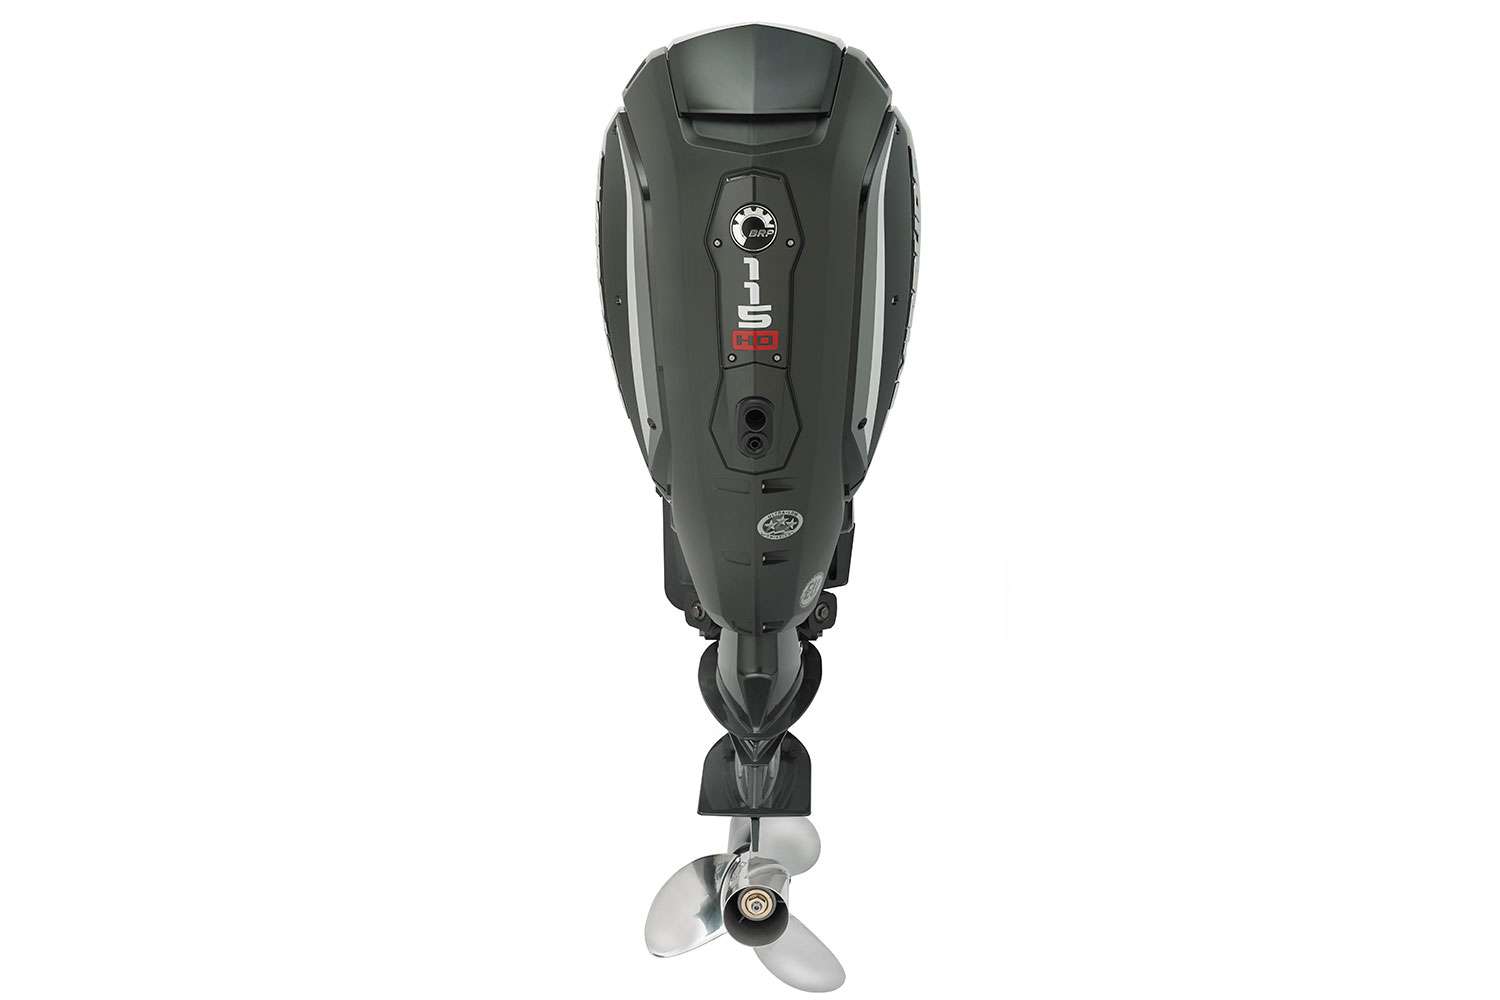   <b>Evinrude E-TEC G2</b></p>
<p>The motor now packs next-generation technology such as digital shift and throttle, the iTrim control system, digital instrumentation, custom color panels and optional iSteer dynamic power steering into outboards from 115 H.O. to 300 horsepower. Evinrude also added a new look and feel for the 2020 product year. All E-TEC G2 engines will have new premium graphics and give owners the option of white or slate gray frame and two new propellers. In addition, the 115 H.O. and 140 models will be available with premium controls and gauges, as well as a tiller option that feature touch troll and trim switches, LEDâs for basic diagnostics and an NMEA 2000 connection for integration with external gauges and accessories.
 <BR>

<a href=